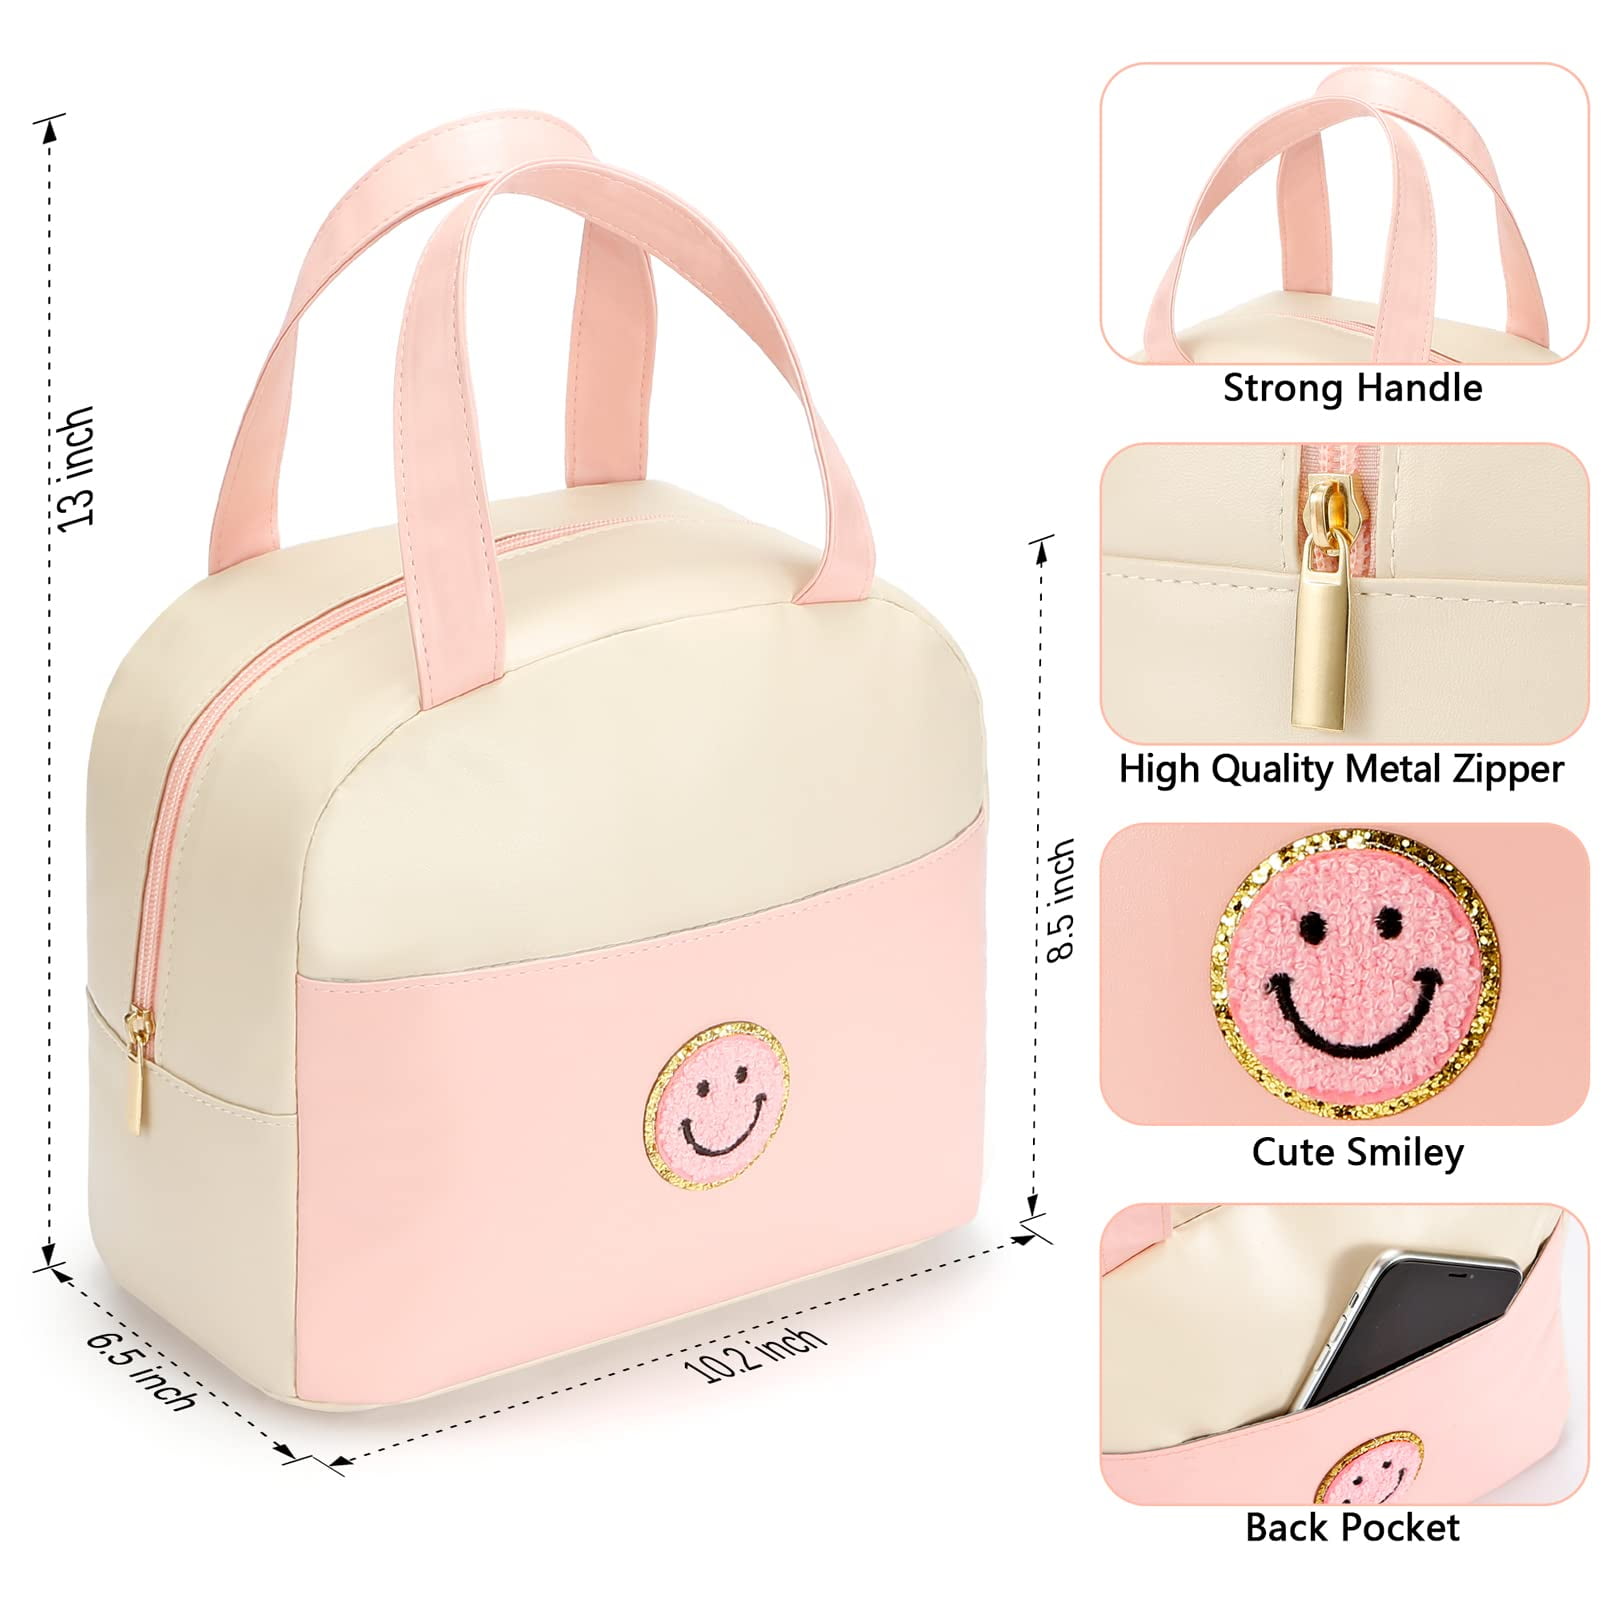 Lunch Box for Women, Large Insulated Lunch Bag, Personalized Preppy Lunch  Box for Girls Adults with …See more Lunch Box for Women, Large Insulated